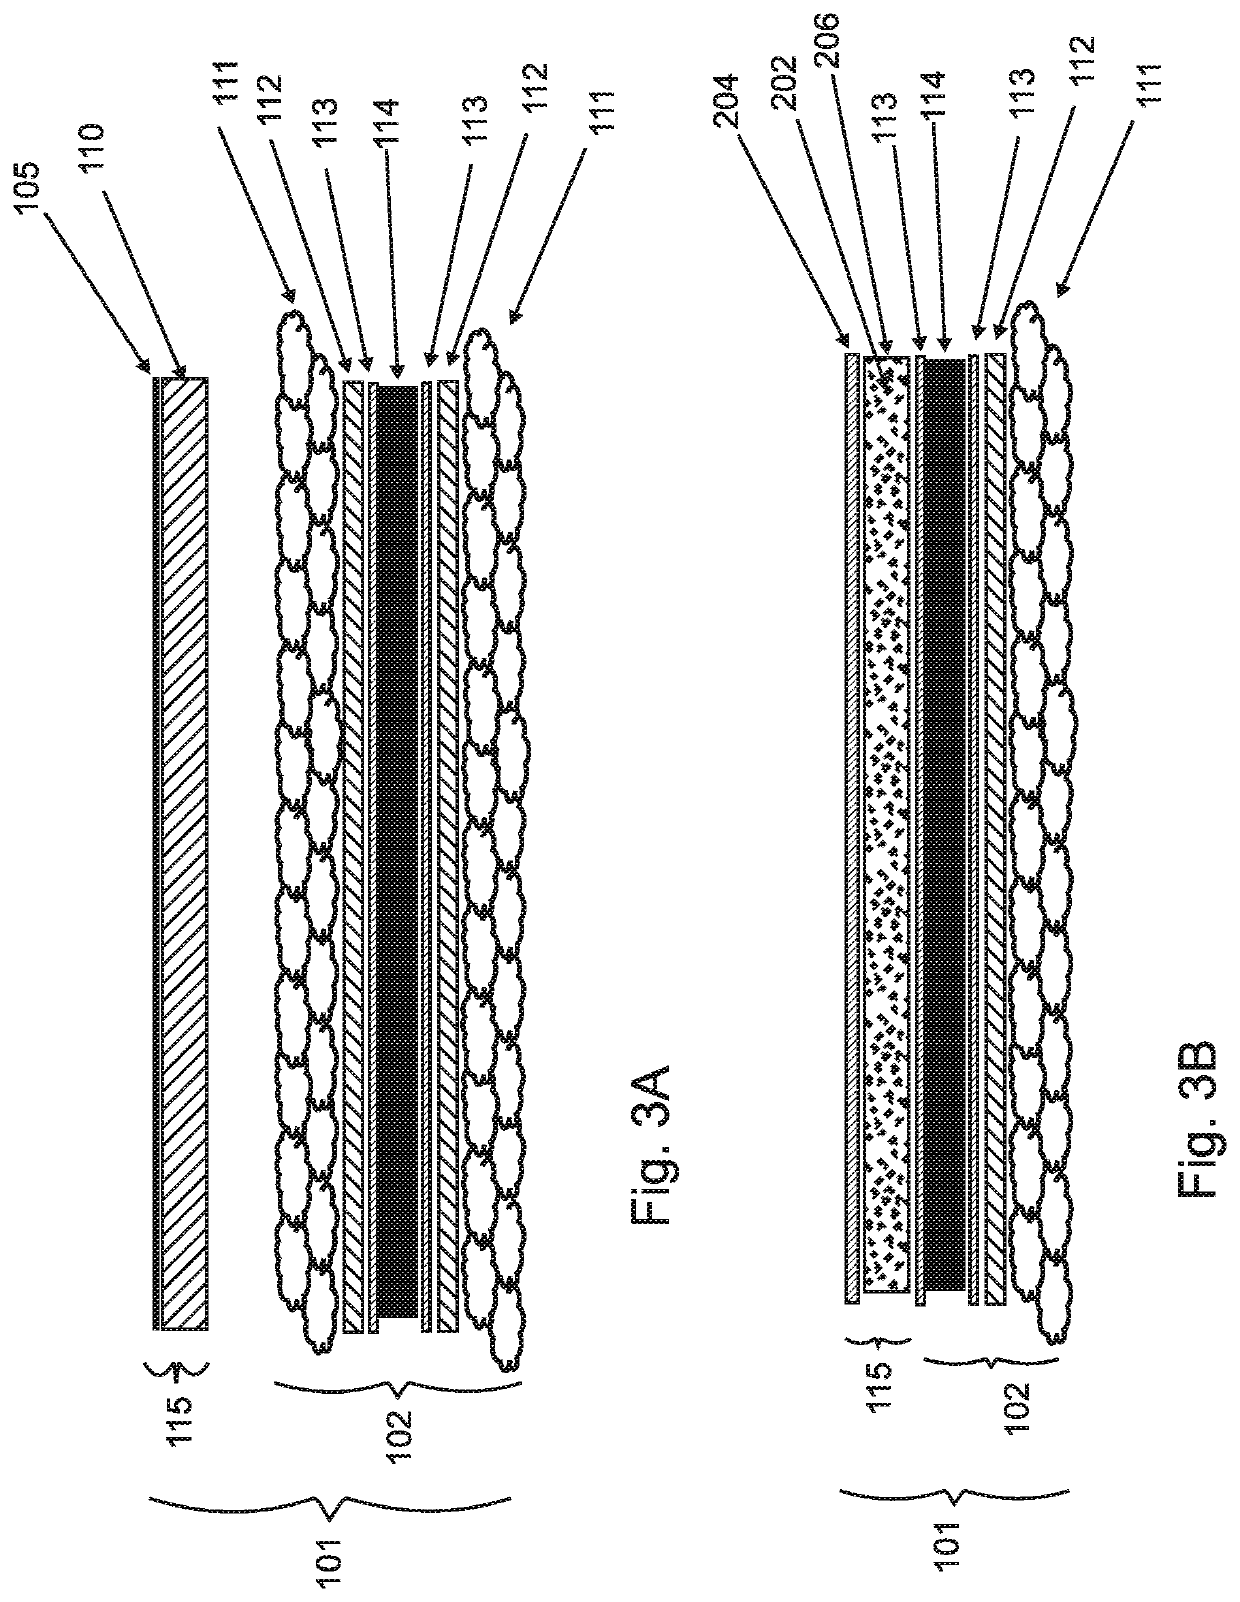 Flexible and foldable electromagnetic shielding